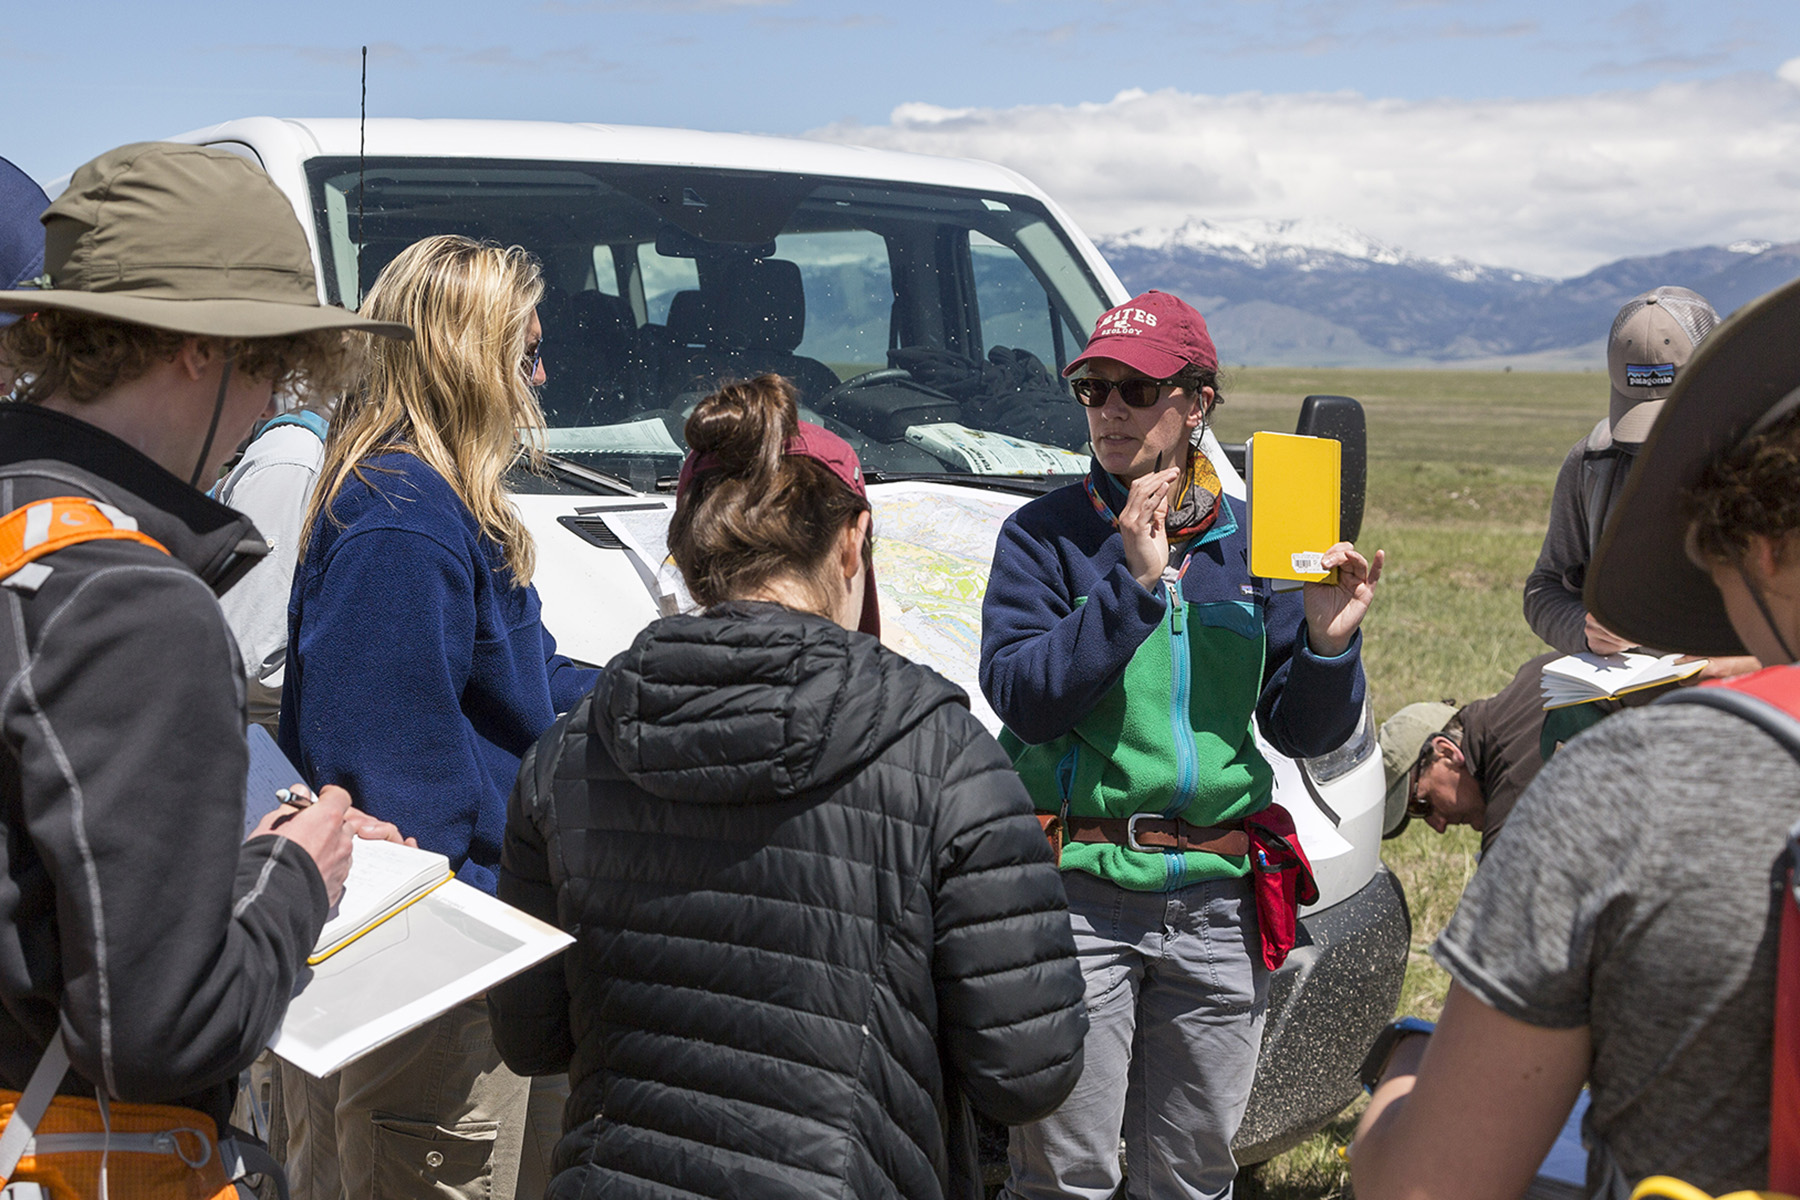 Professor Genevieve Robert introduces background information for the final mapping project of the course, a metamorphic puzzle near Ruby Creek, a few miles down the road from the Imerys Talc mine.

On Tuesday, May 17 2016, students in the Short Term course offering "Geology of the Northern Rockies and Columbia Plateau" visited the Yellowstone Mine run by Imerys Talc outside of Ennis, Montana, after which they began a two day metamorphic mapping project at nearby Ruby Creek.

Unlike the copper mining at Continental mine and past copper mining at the Berkeley Pit in Butte, the mining operations at Imerys produce comparatively little waste. This is because Montana has some of the purest Talc deposits on the planet. As a result, land reclamation processes are far more successful and faster to develop than reclamation processes for copper and other mining. 

The Imerys mine produces 250,000 tonnes of Talc annually to be used in the manufacturing of products such as soap, rubber, ceramics, paints, and paper. 

After the tour and a lunch break on the banks of the Madison river, the class continued on to nearby Ruby Creek to begin their final mapping project of the trip. 
The class then returned to West Fork campground for the night.